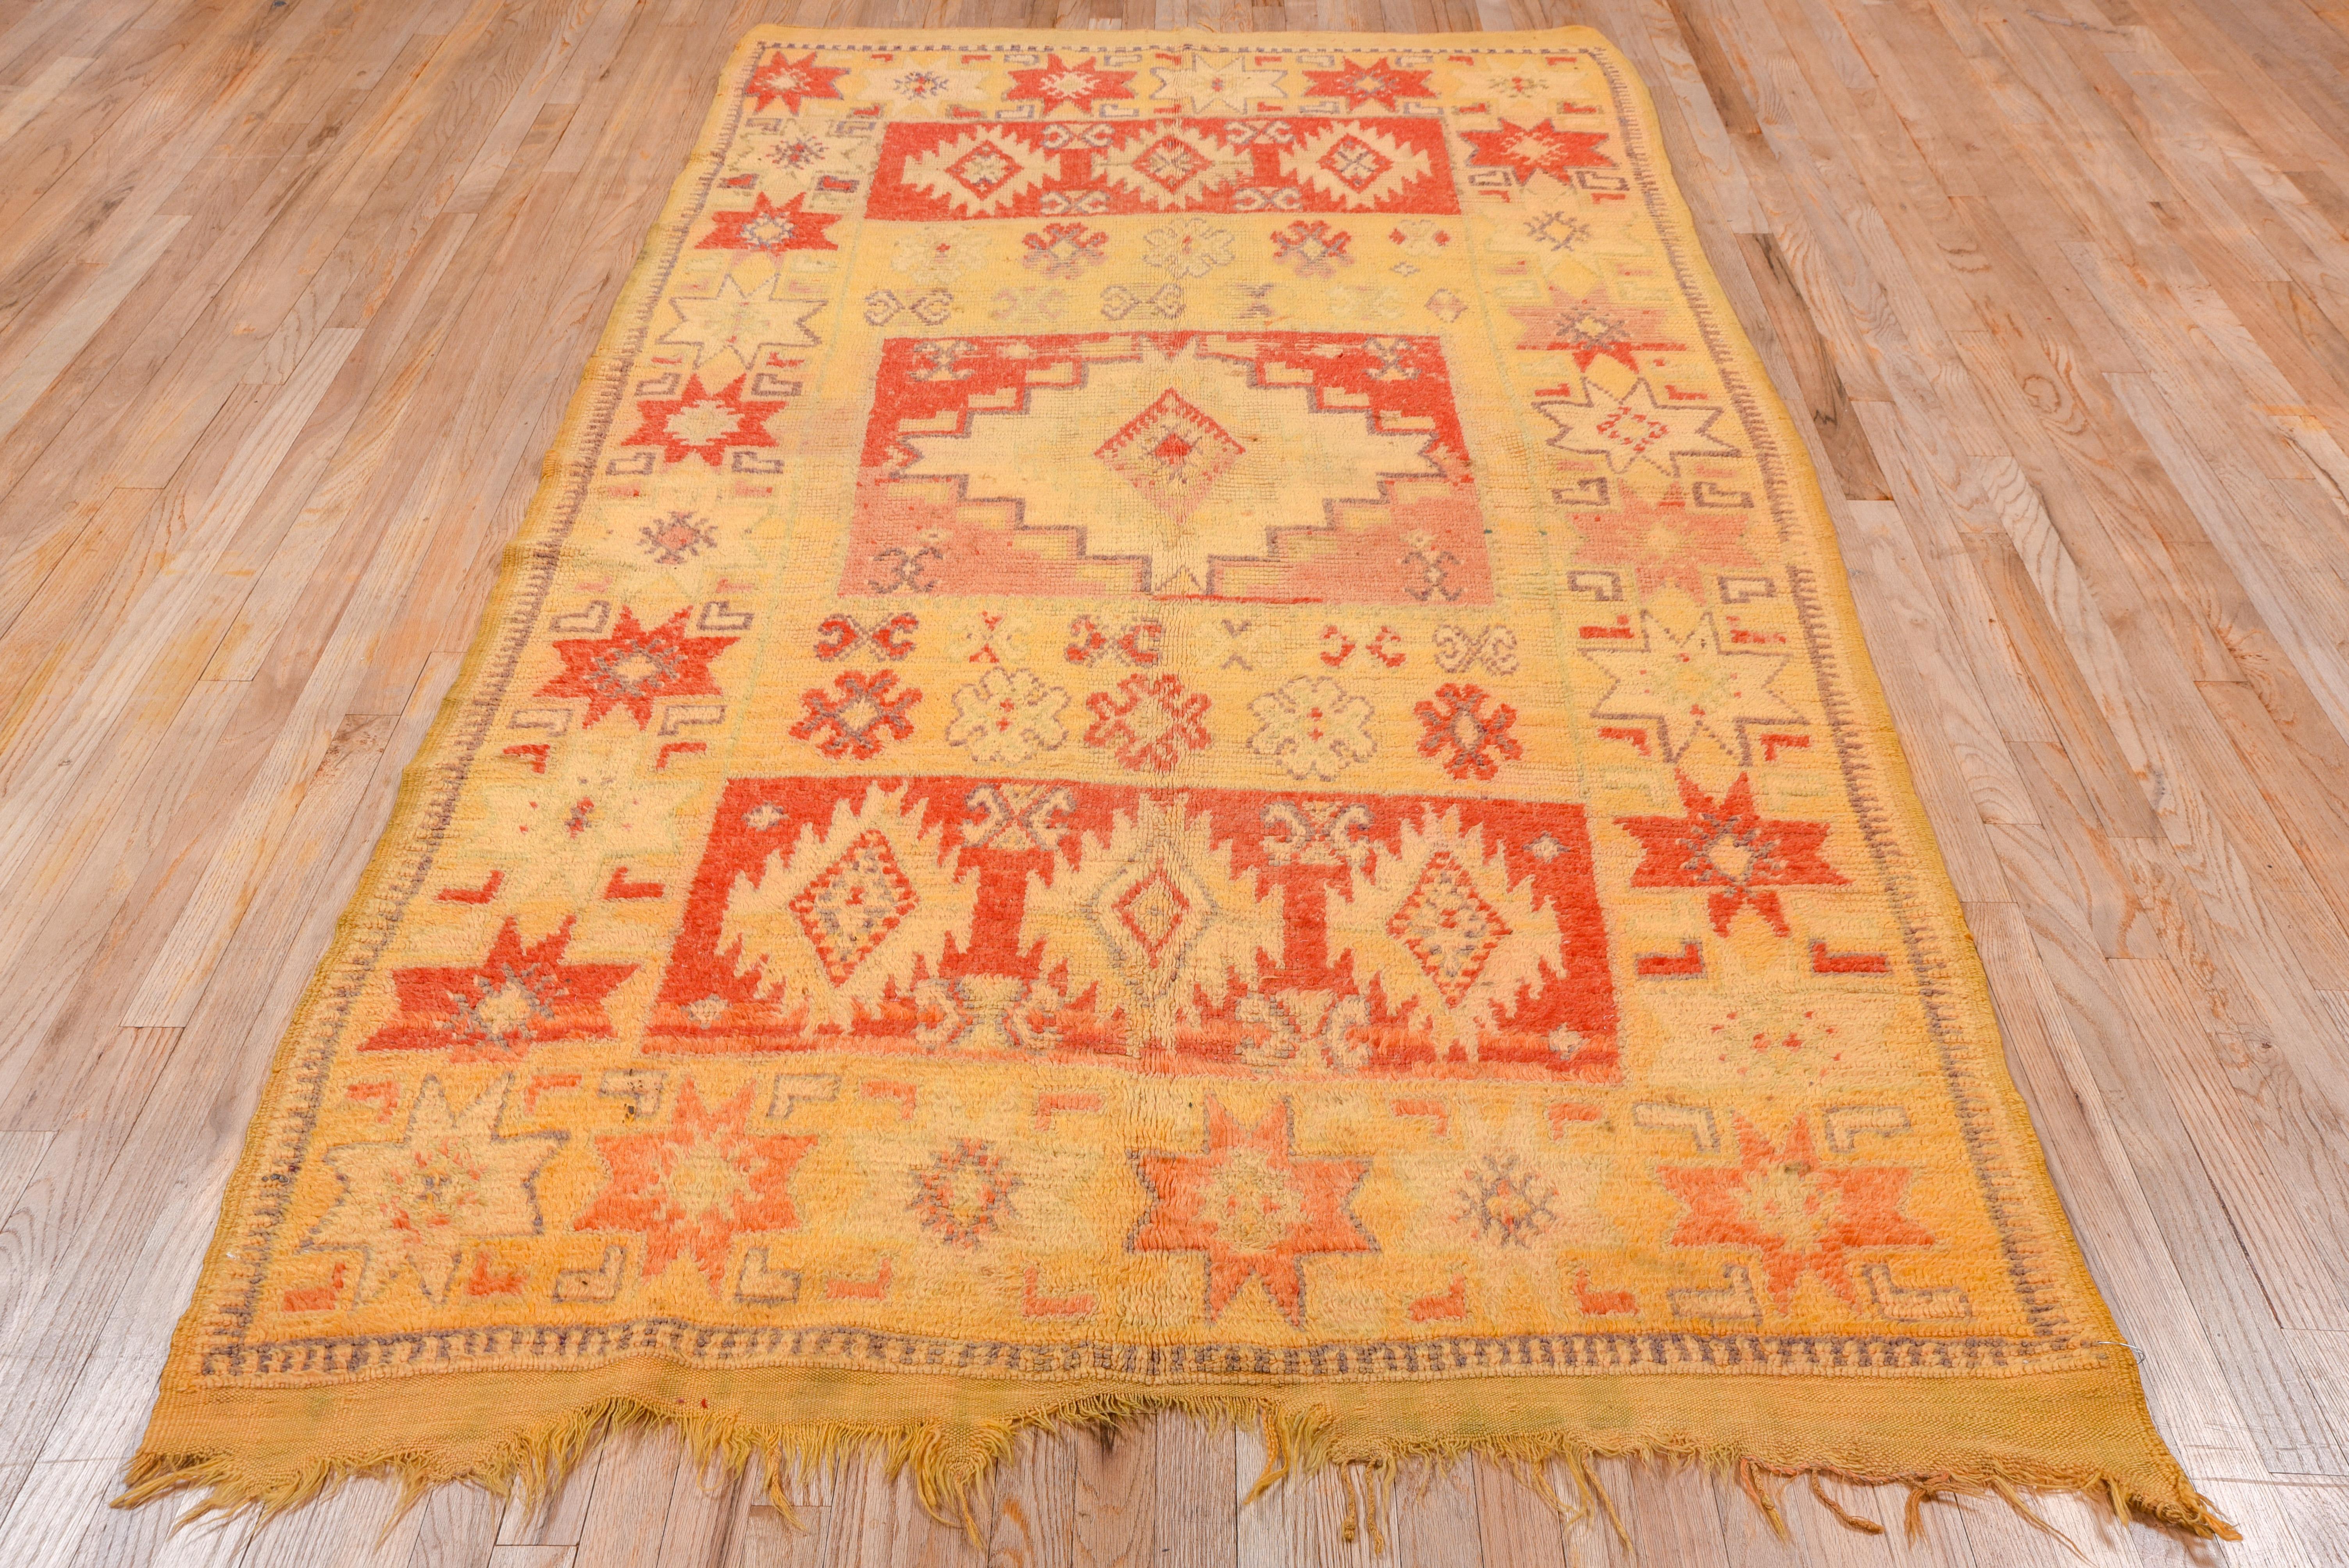 Rustic Vintage Moroccan Rug, Yellow and Red Field, Bright Colors For Sale